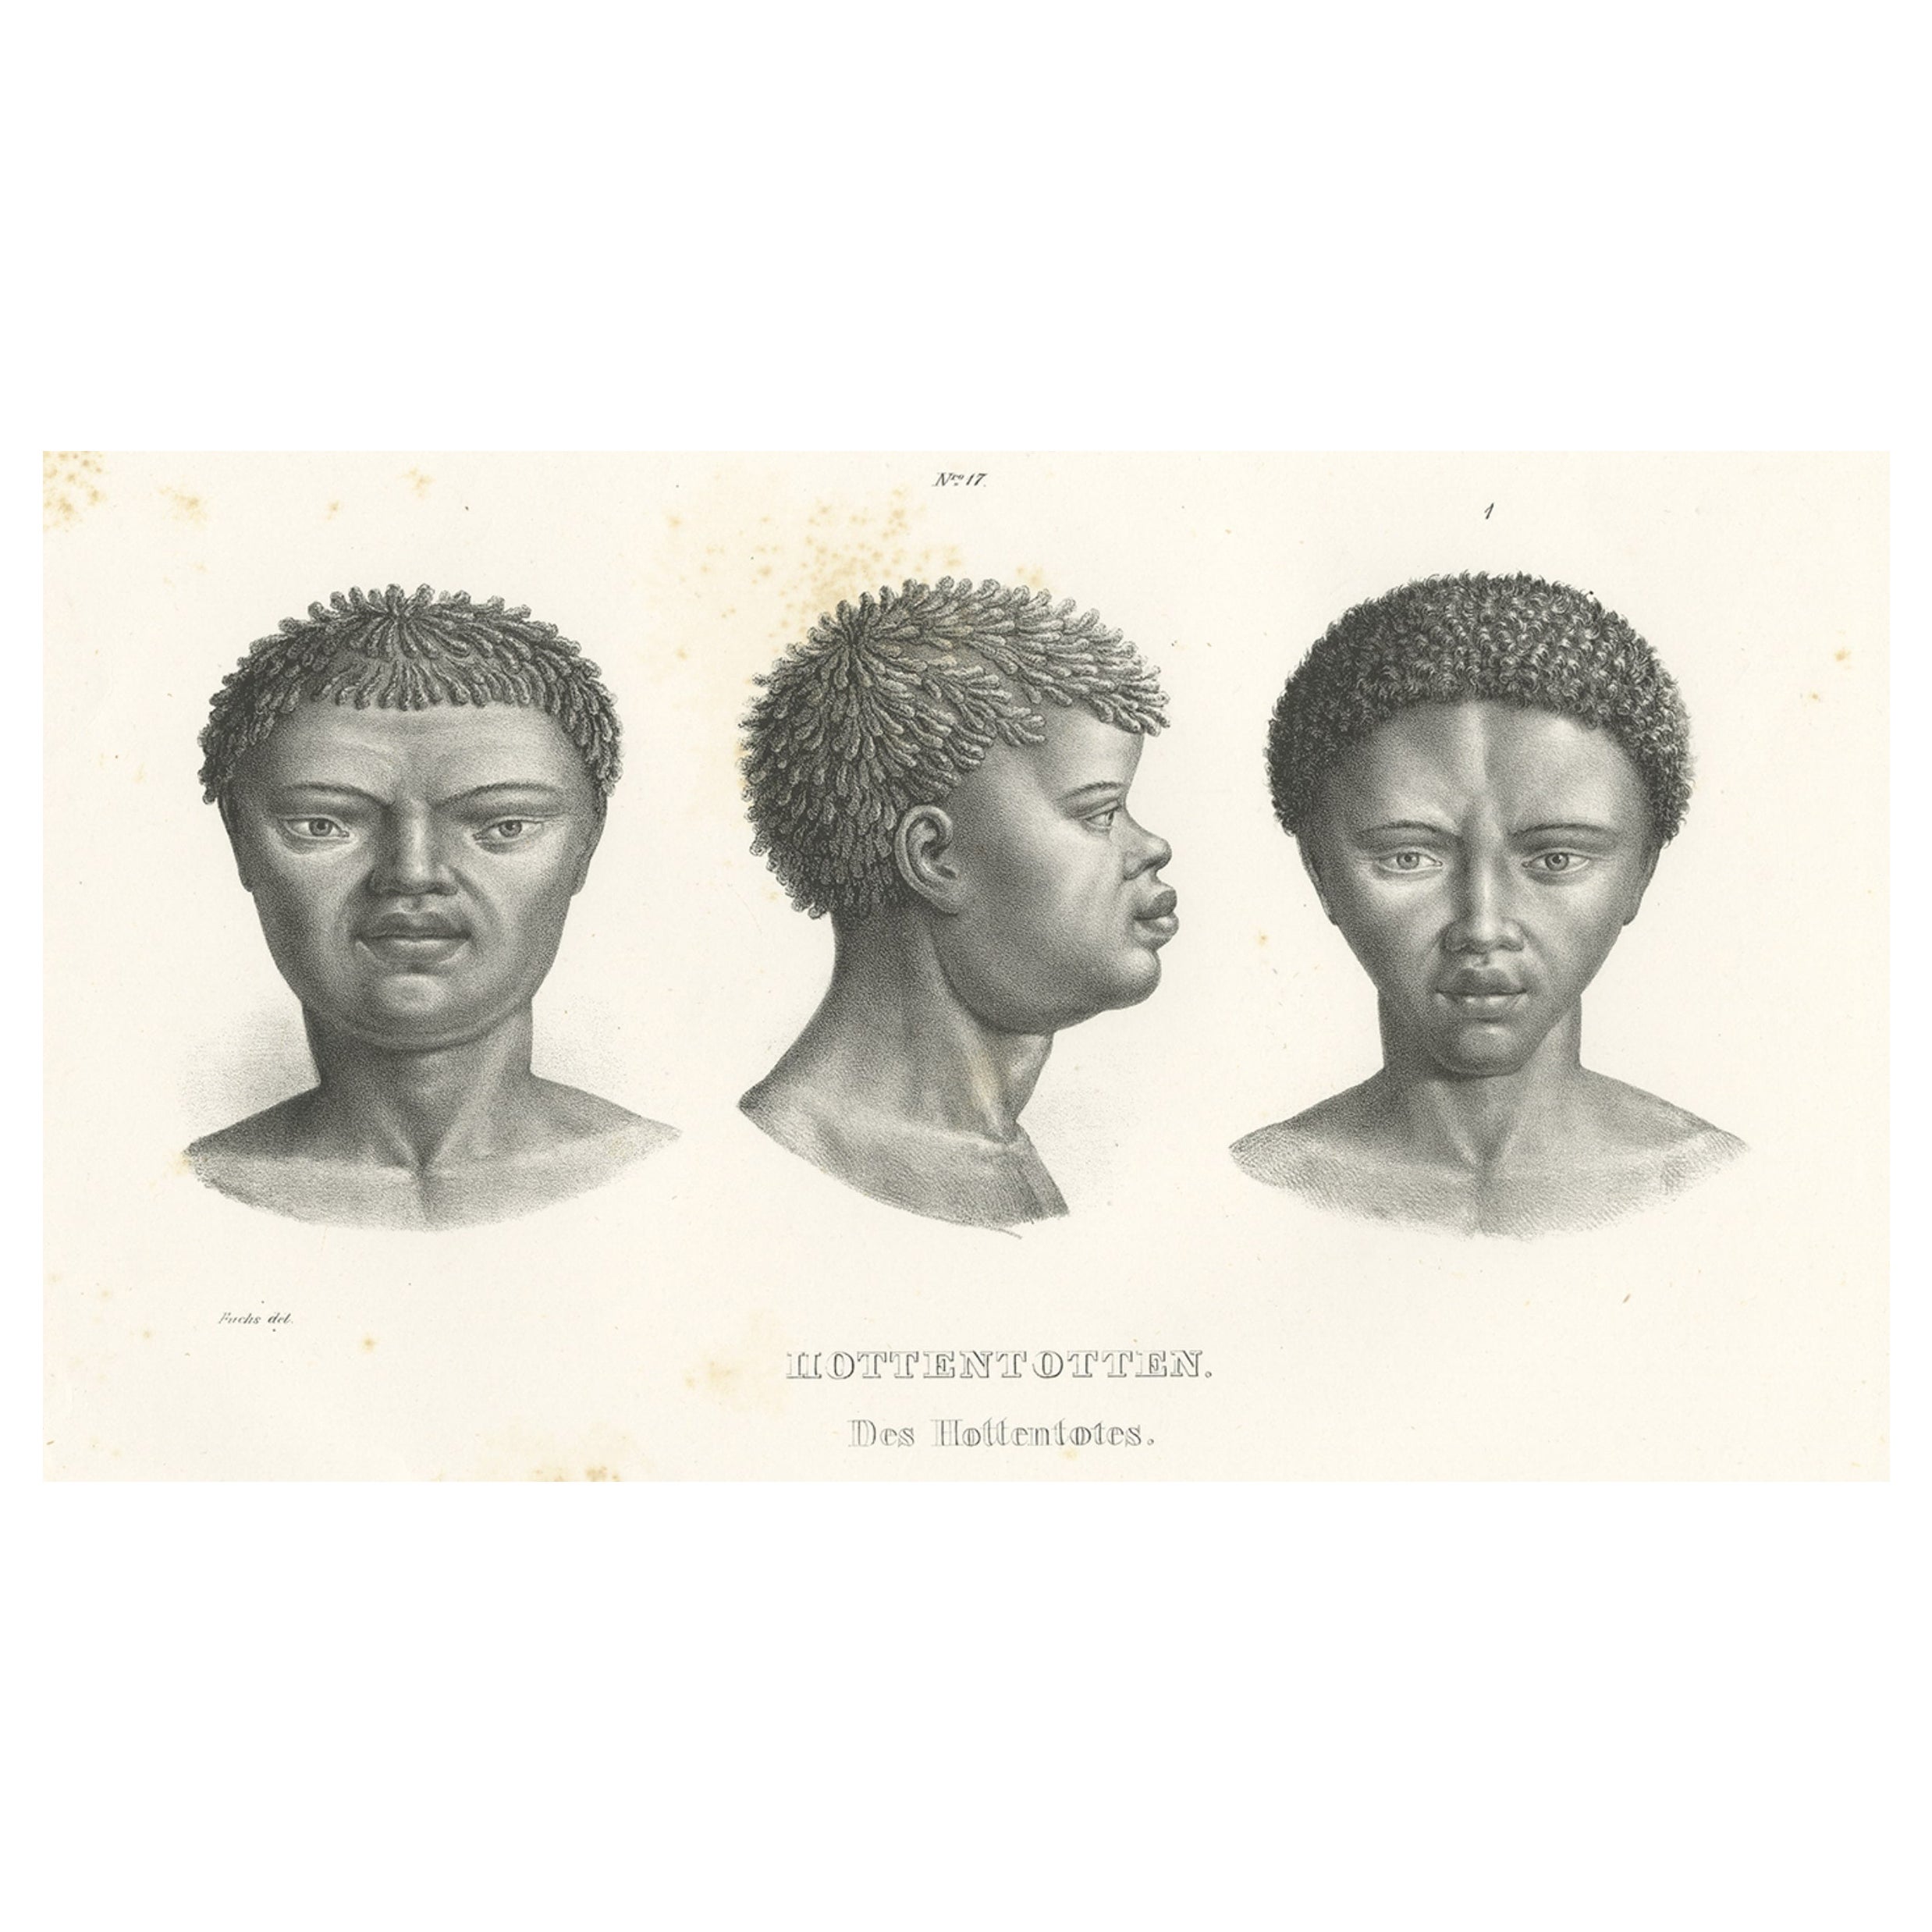 Antique Print of Khoikhoi, Hottentot Tribe in South Africa, C.1845